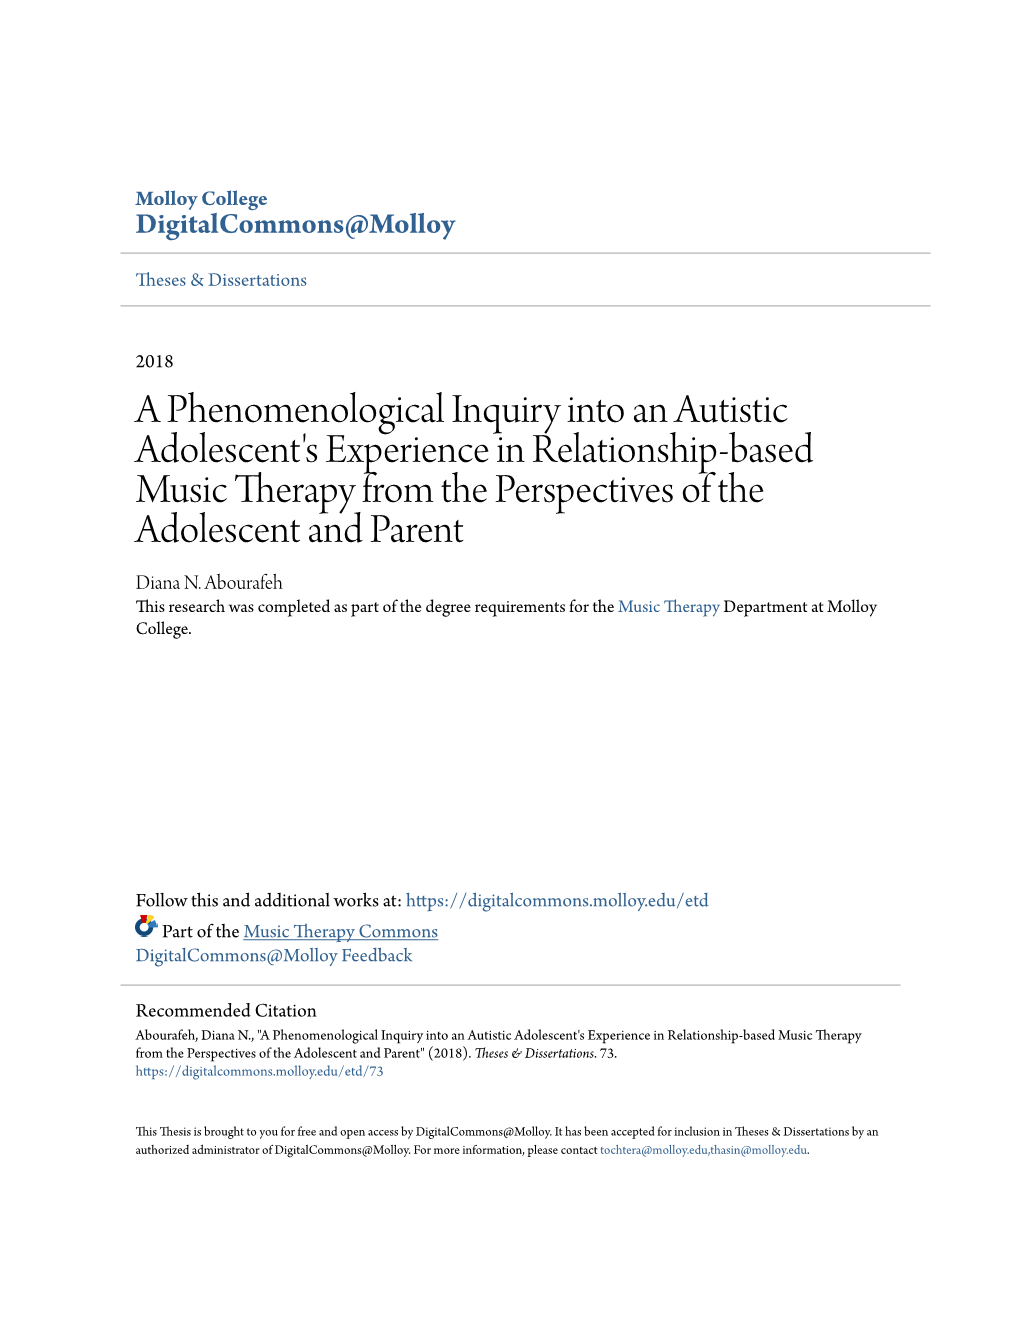 A Phenomenological Inquiry Into an Autistic Adolescent's Experience in Relationship-Based Music Therapy from the Perspectives of the Adolescent and Parent Diana N